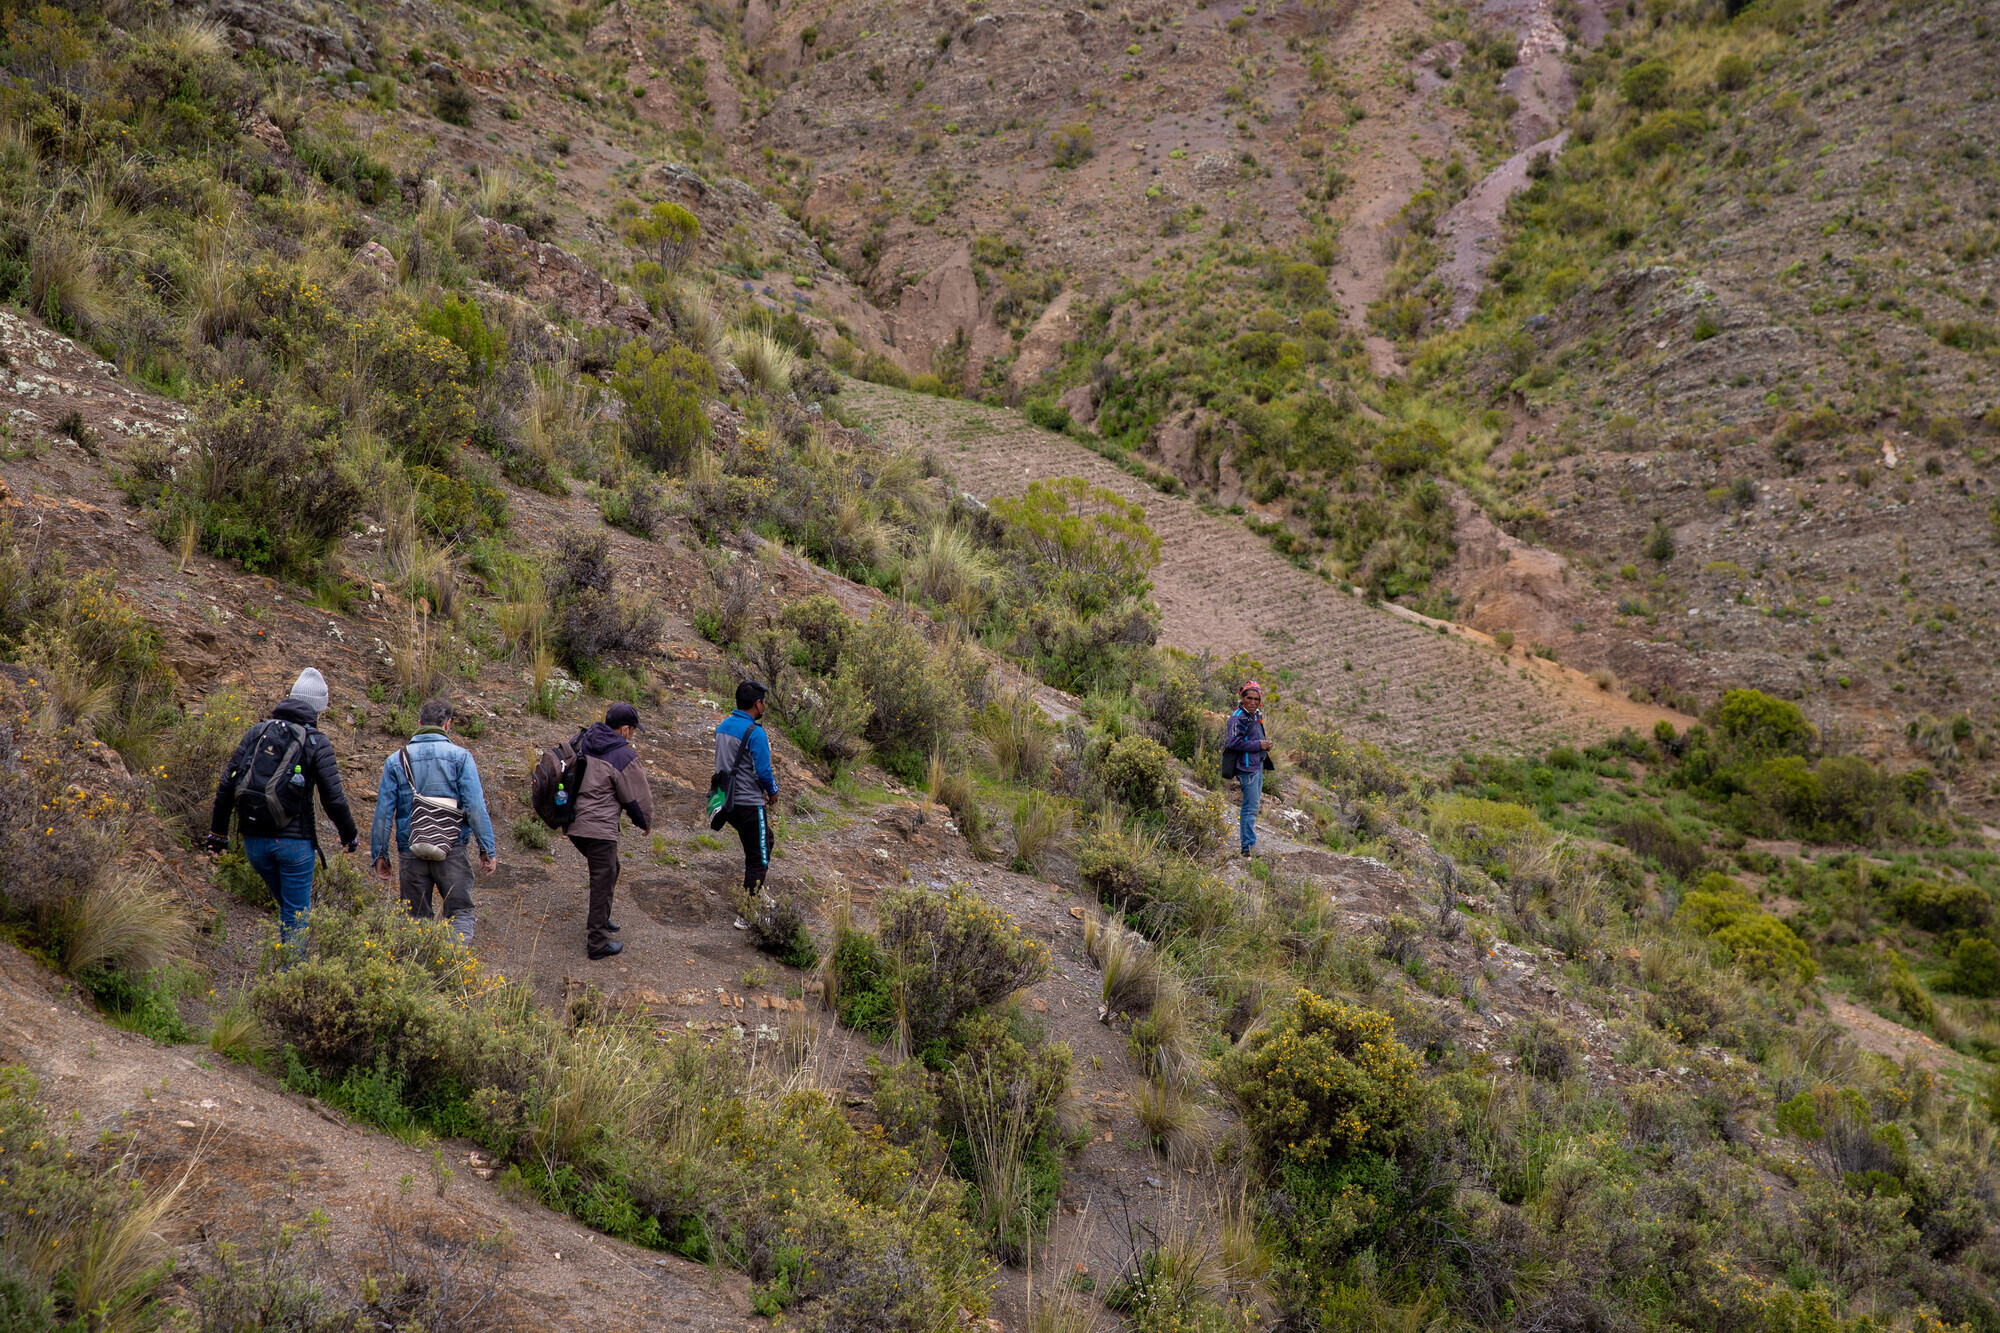 A group of five people walk through the mountainside terrain in Bolivia.